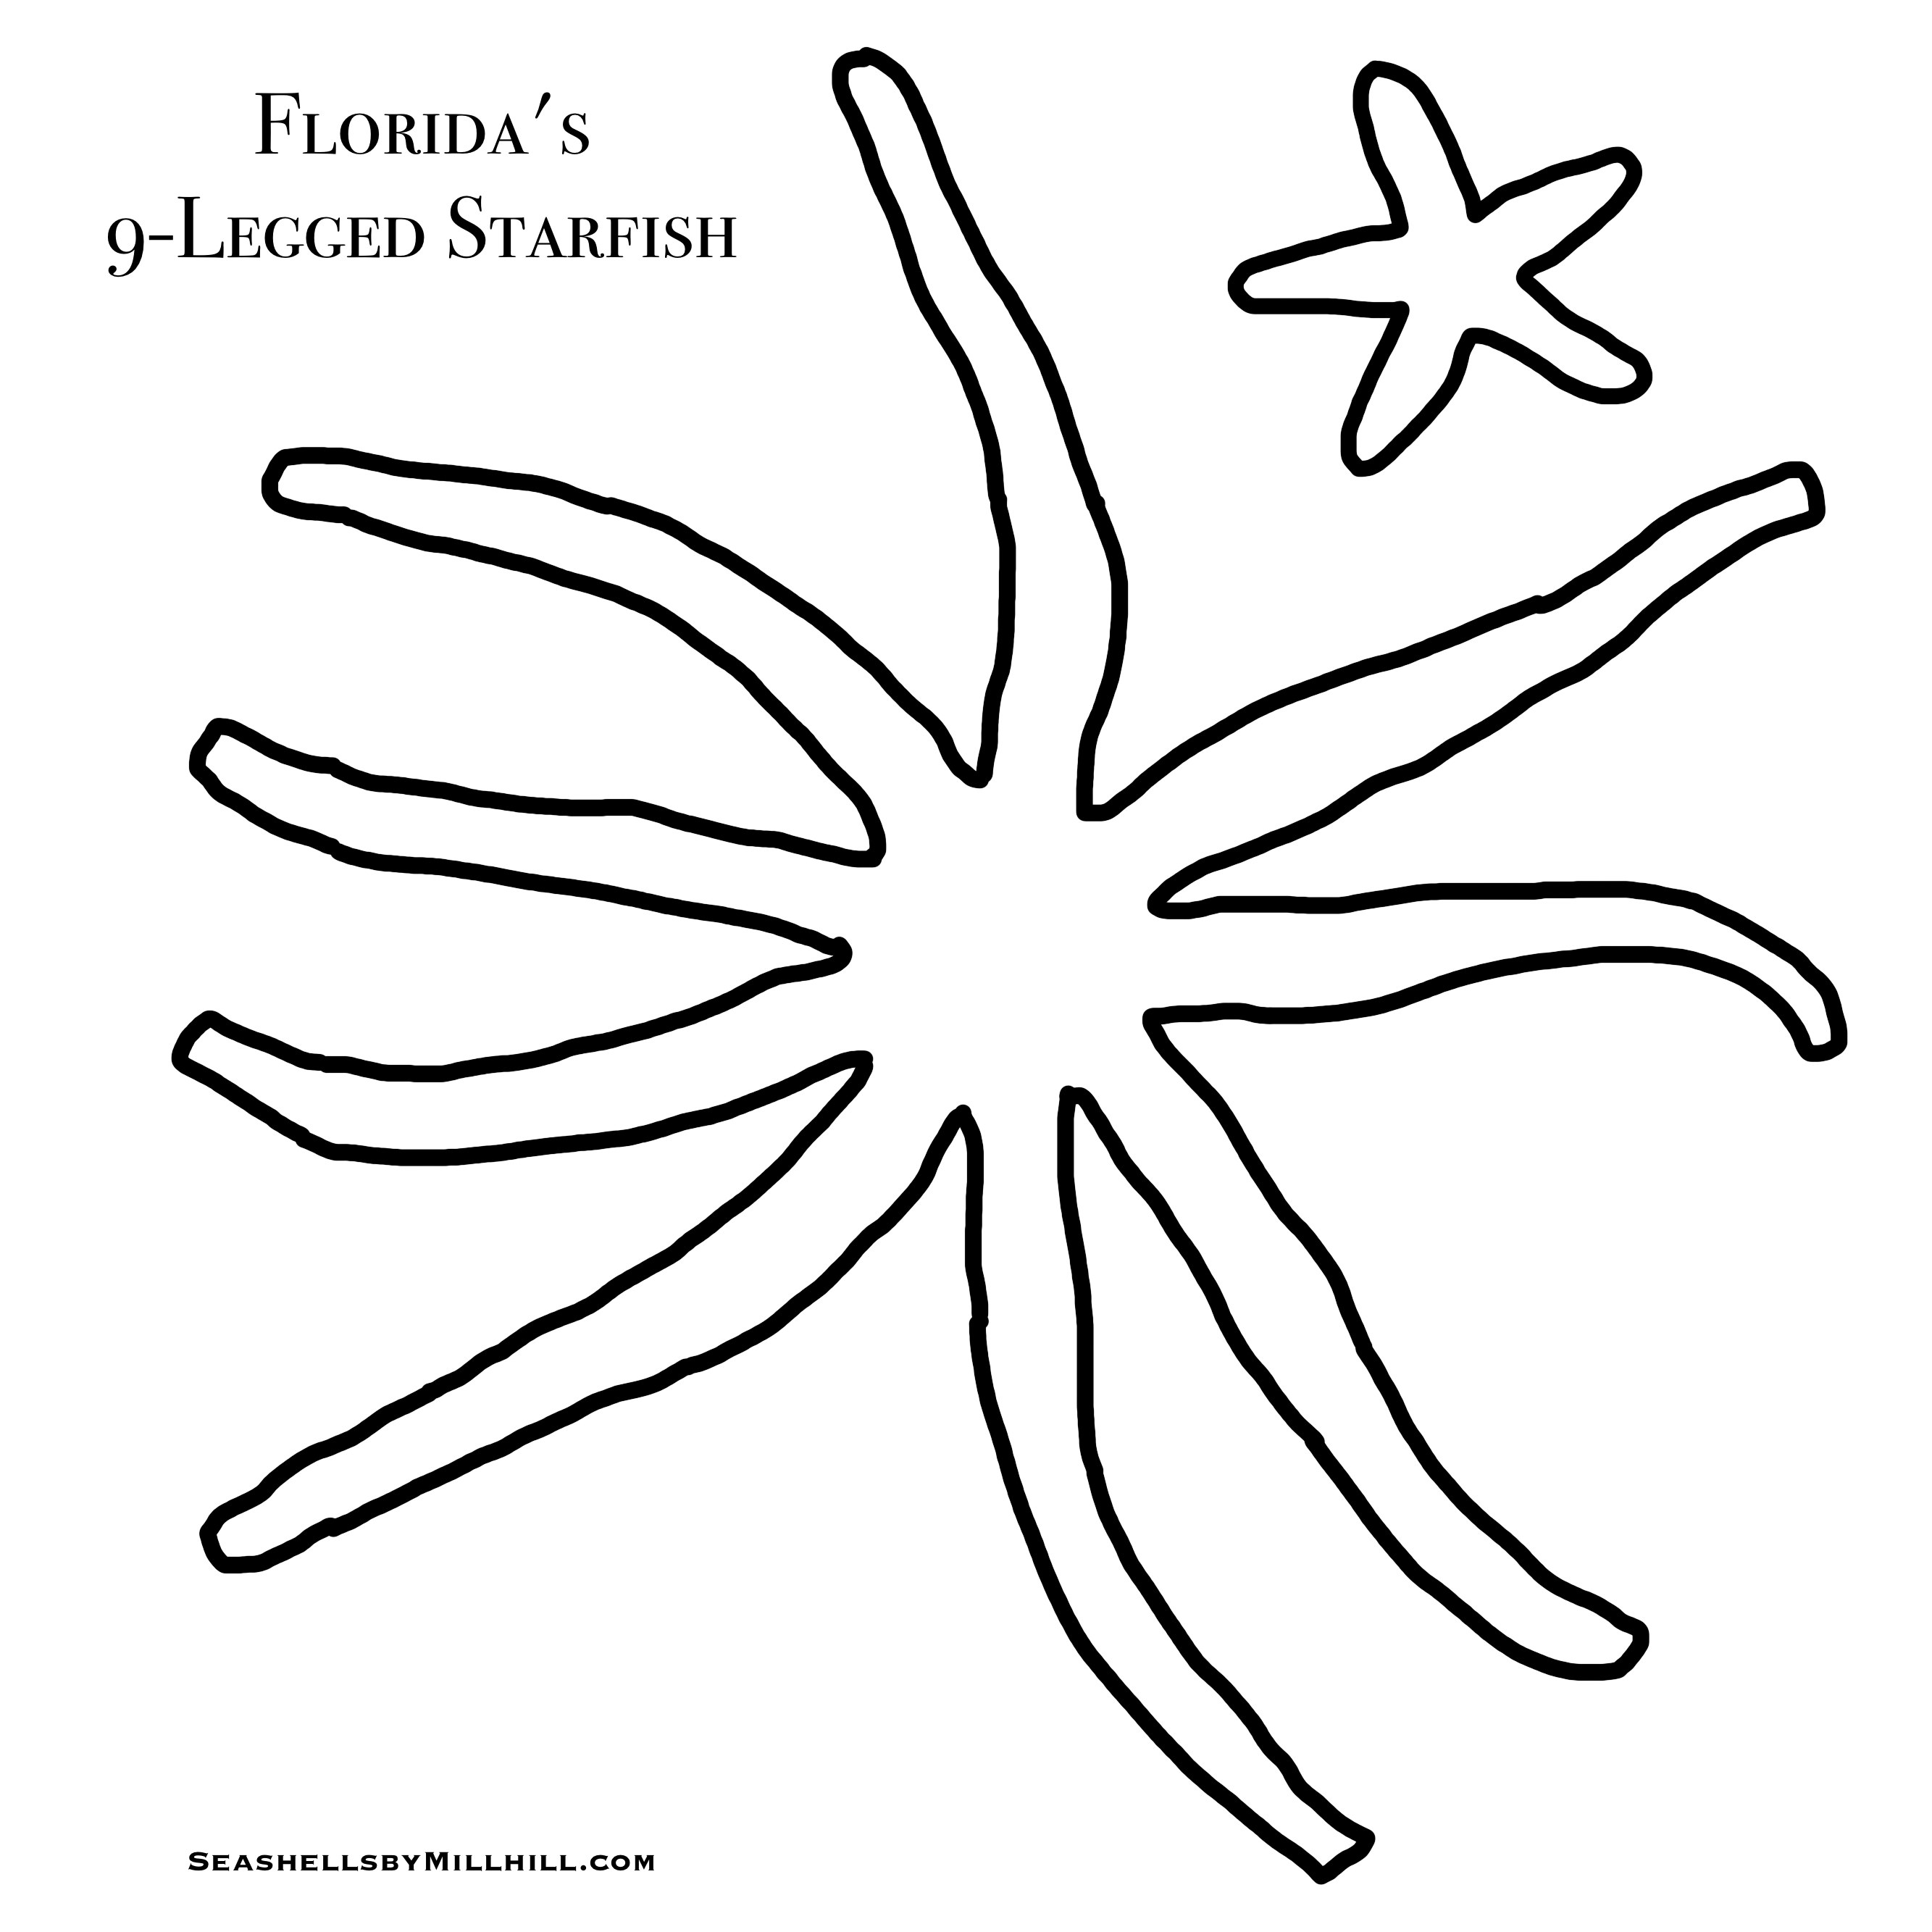 Seashells by MillhillStarfish, or Sea Stars, Coloring Page Printout